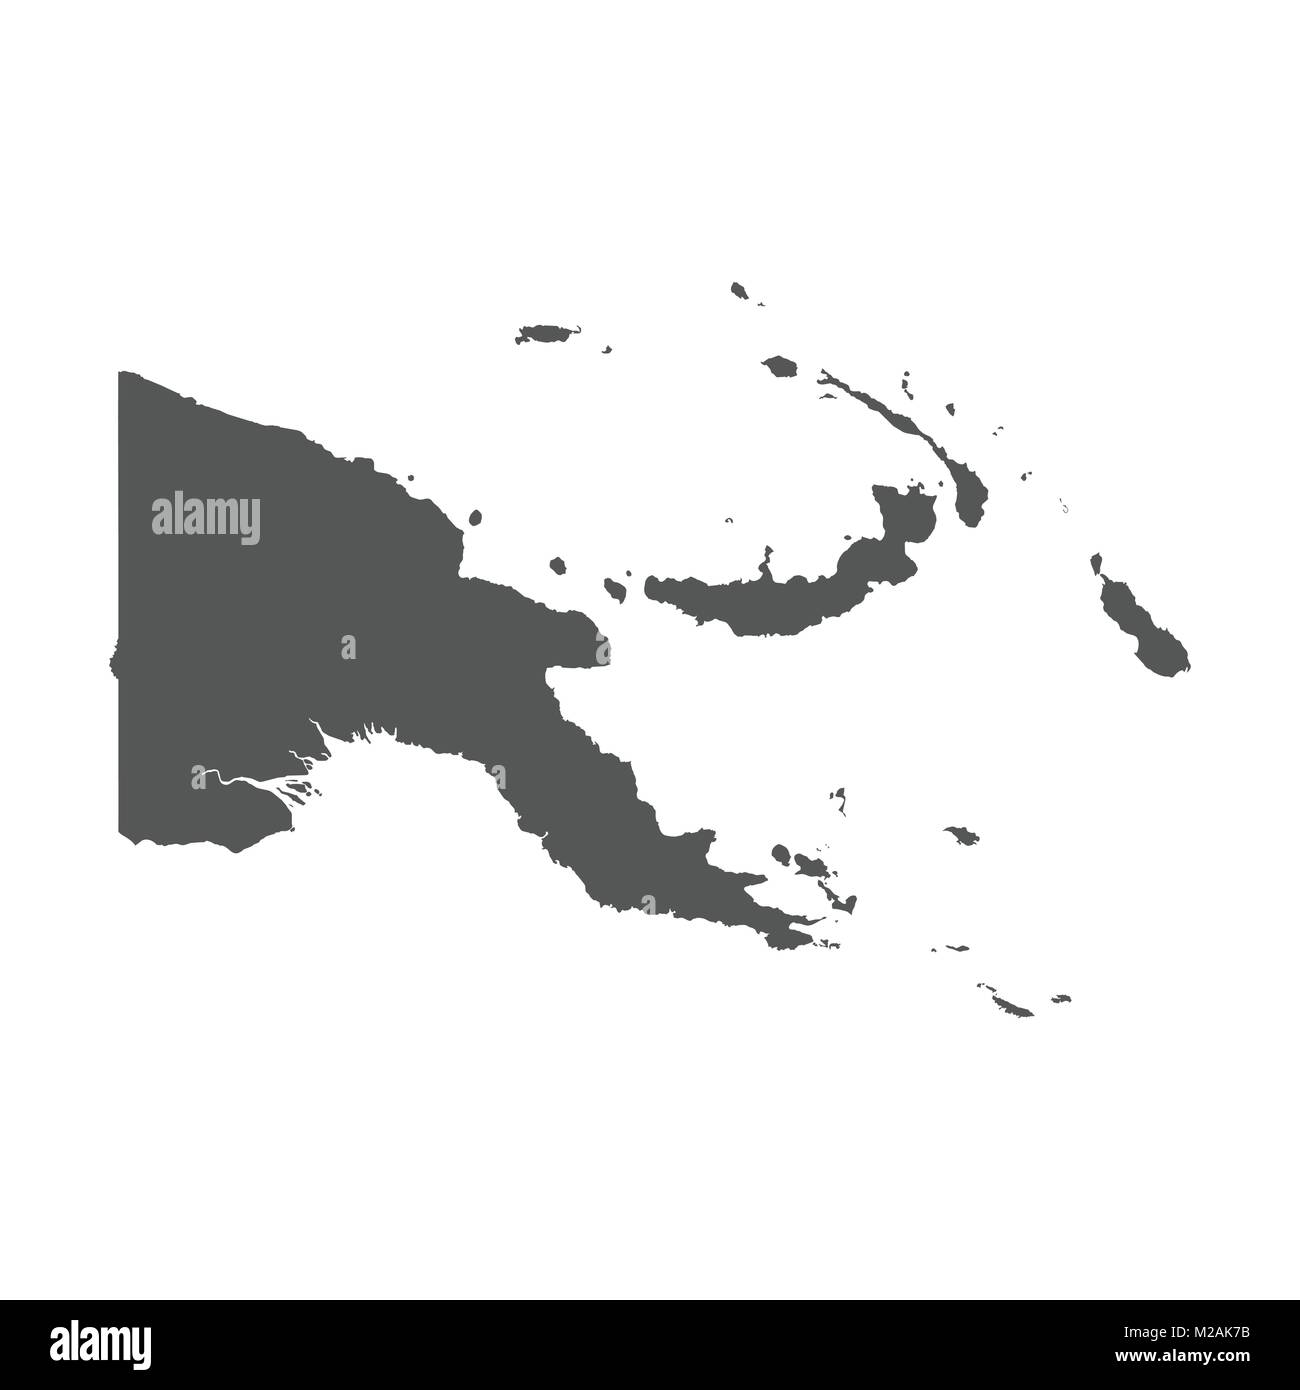 Papua New Guinea vector map. Black icon on white background. Stock Vector